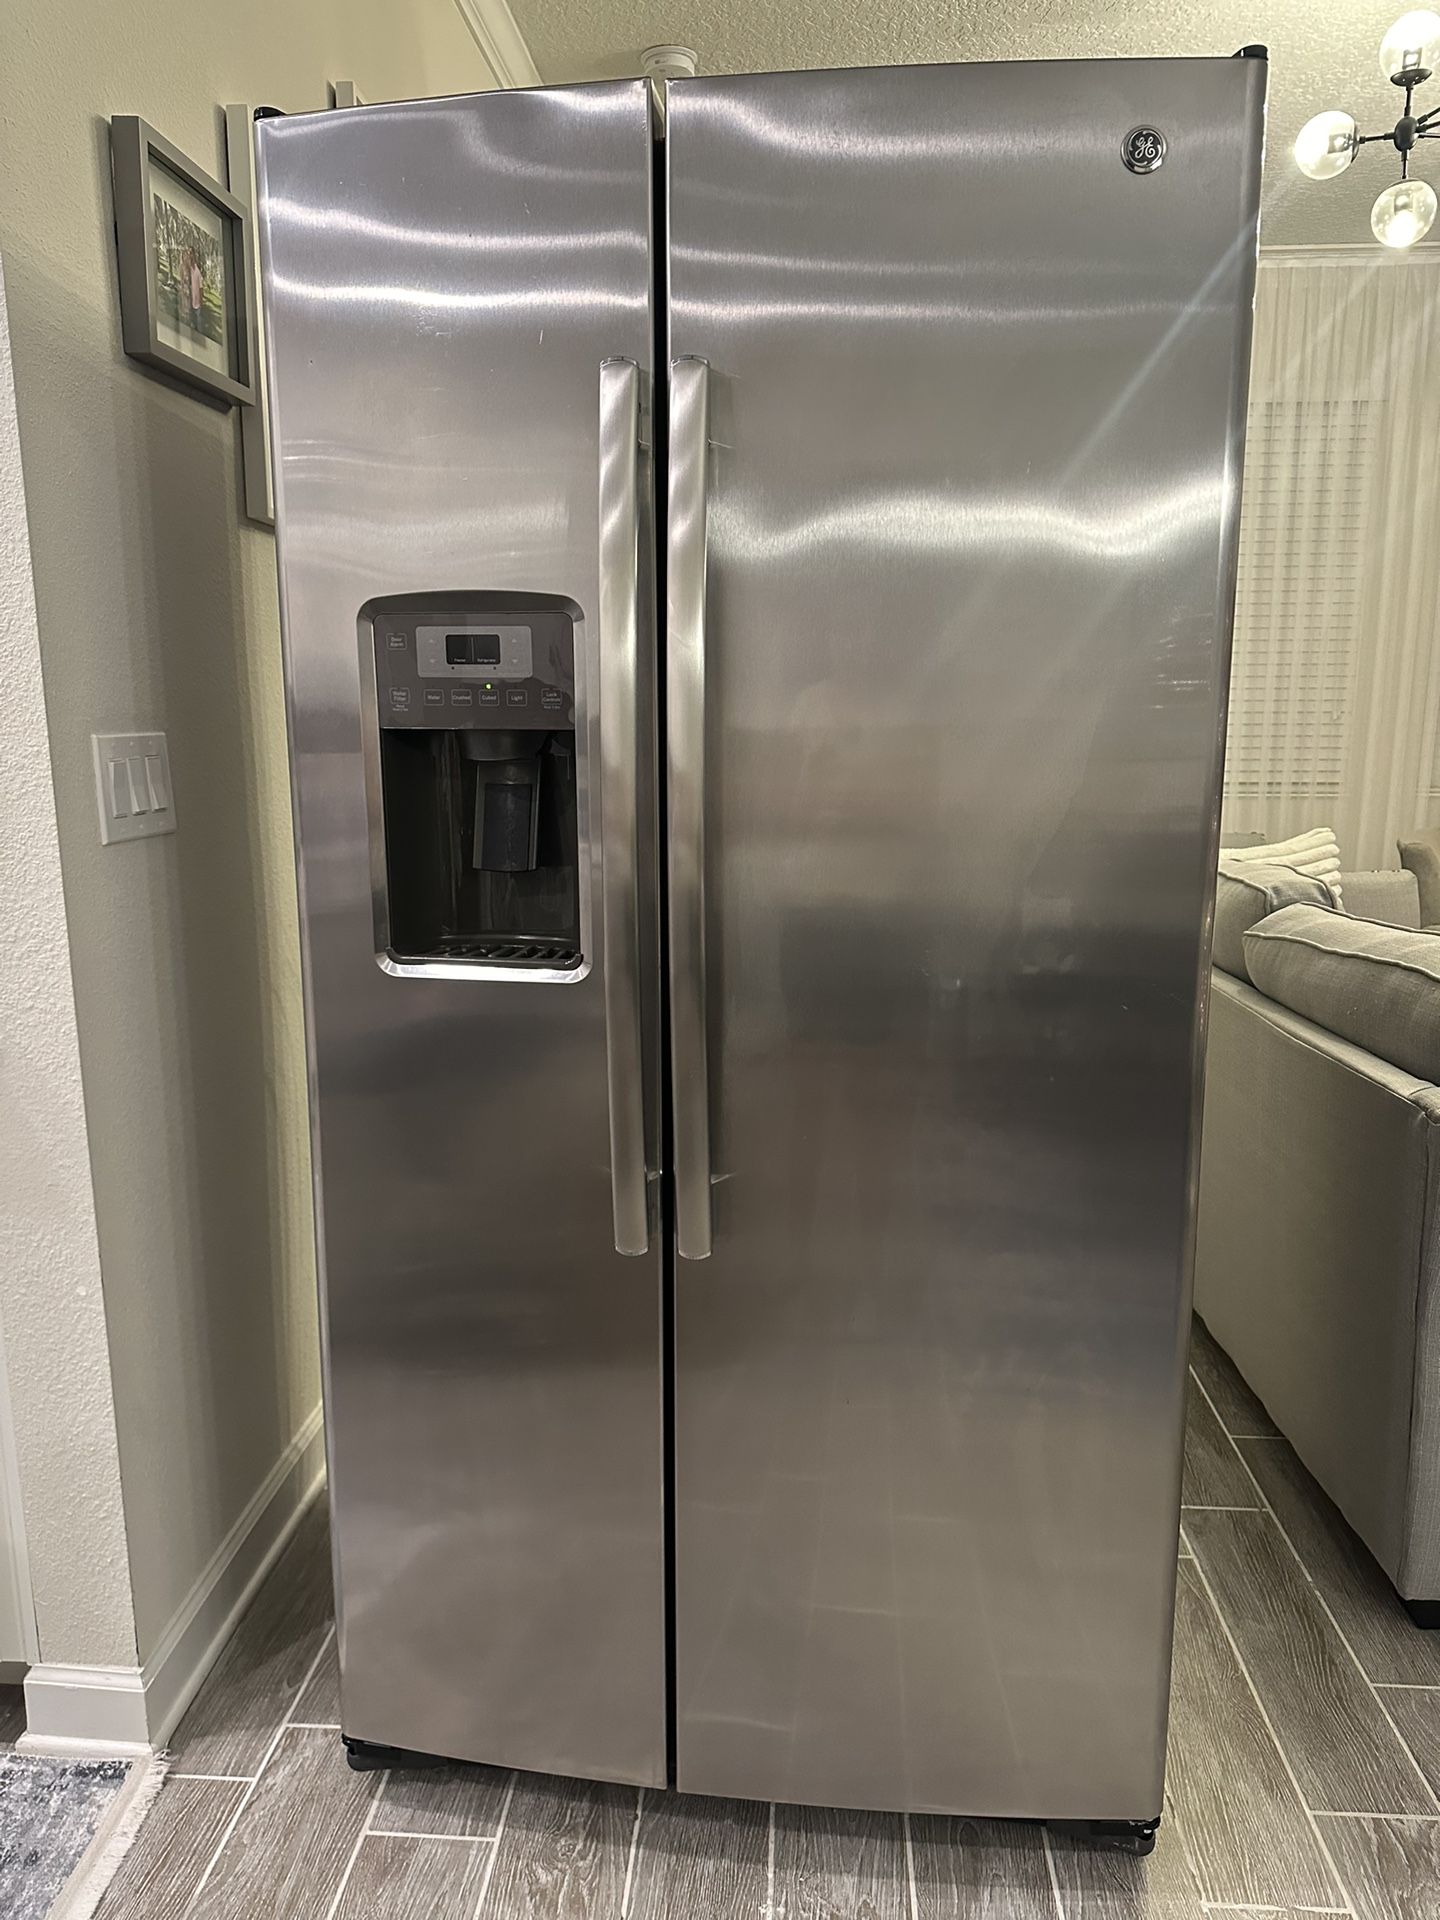 GE 25.3 Cu. Ft. Side-By-Side Refrigerator Stainless Steel